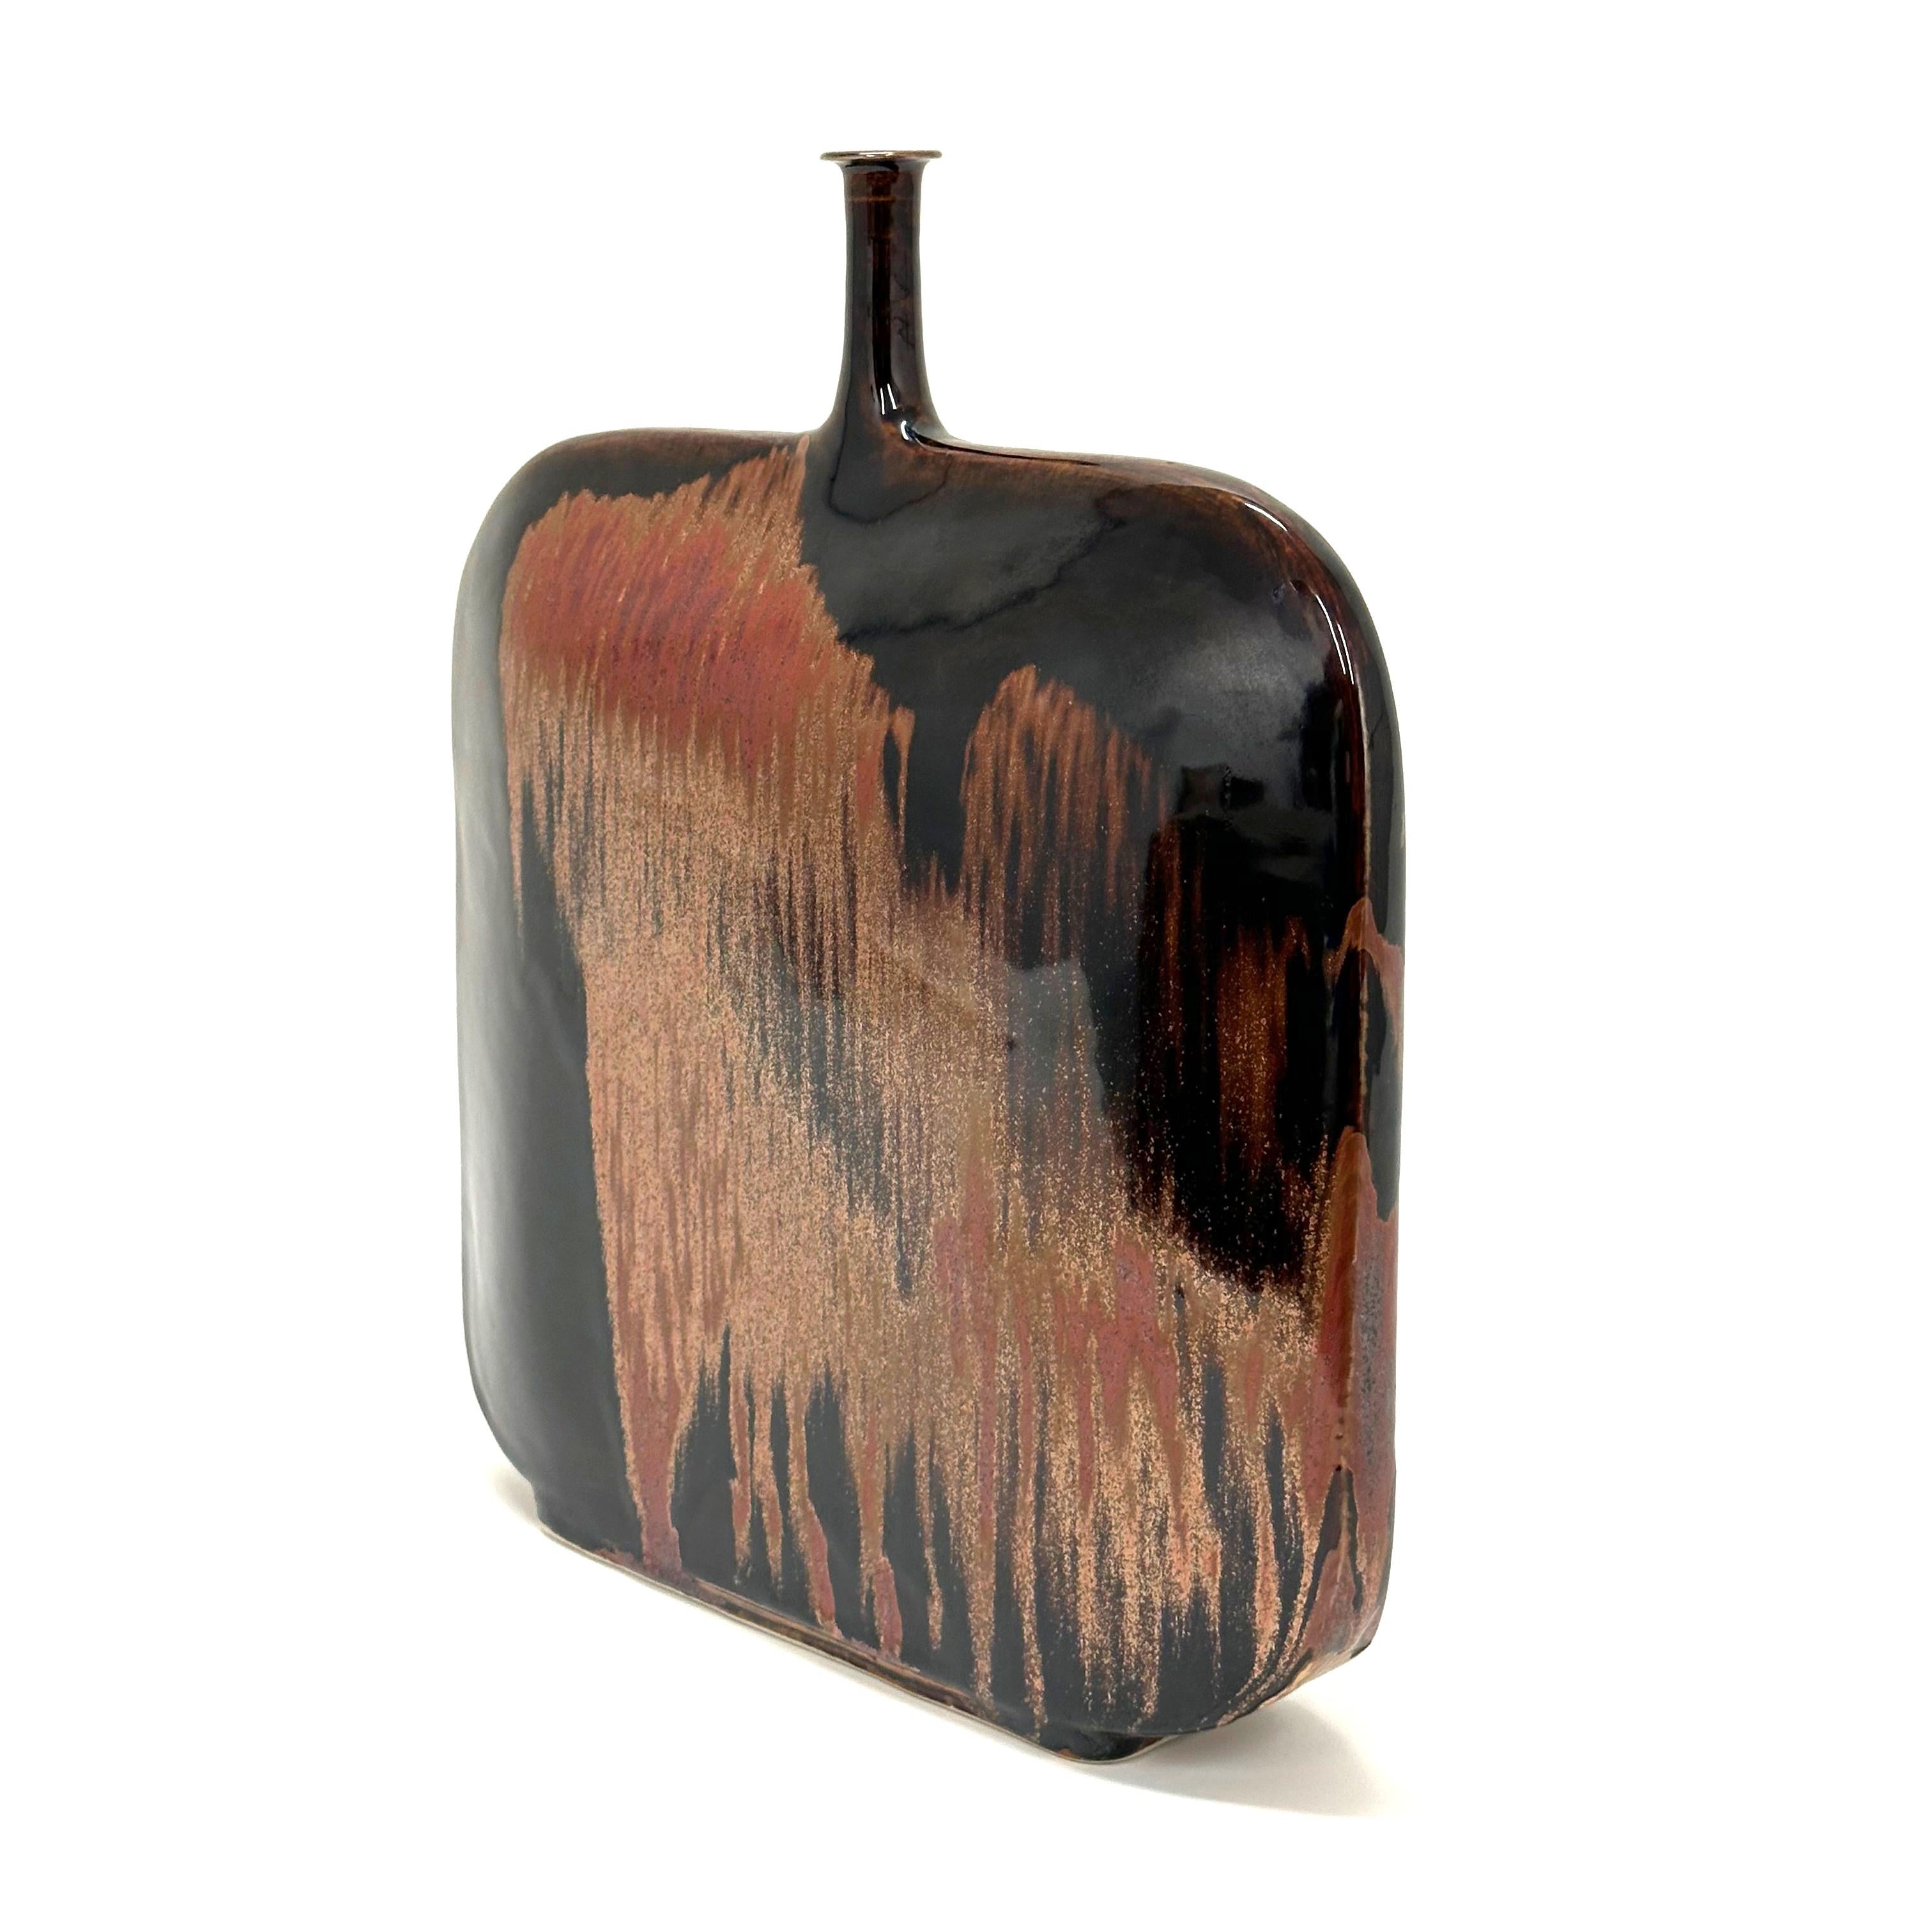 Flask form vase in honan tenmoku glaze by Brother Thomas Bezanson. USA, 1998. Pucker Gallery catalog number, TH1450.

Brother Thomas Bezanson was an internationally renowned ceramic artist and a master of complex glazes and purity of form. Born